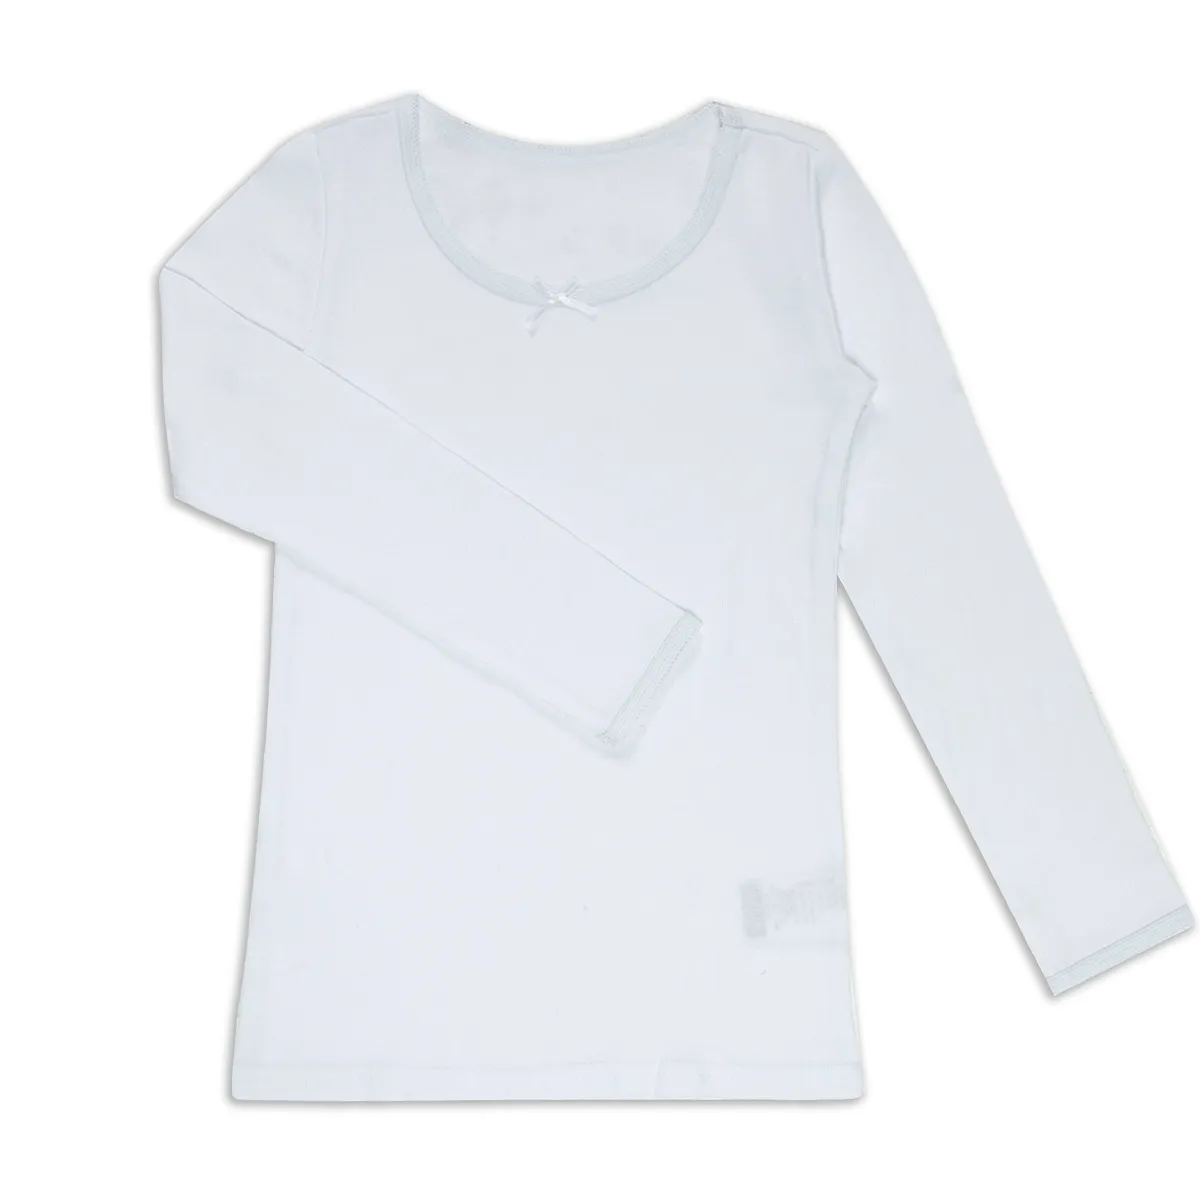 2 Pack long sleeve vests white - GIRLS 2-8 YEARS - Vests